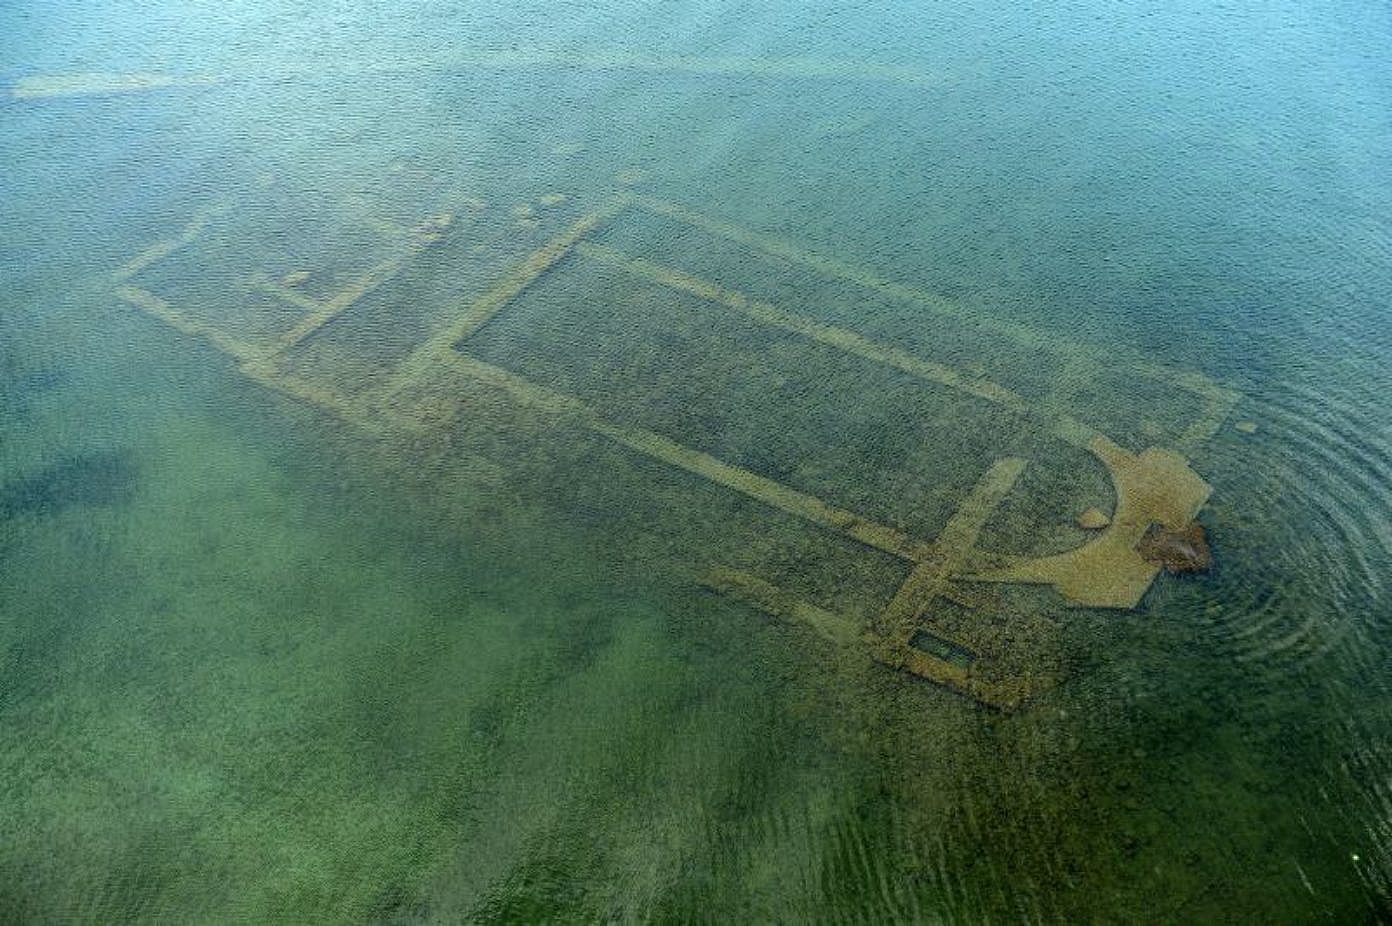 A 1,500-year-old basilica re-emerged due to withdrawal of waters from Lake Iznik 2